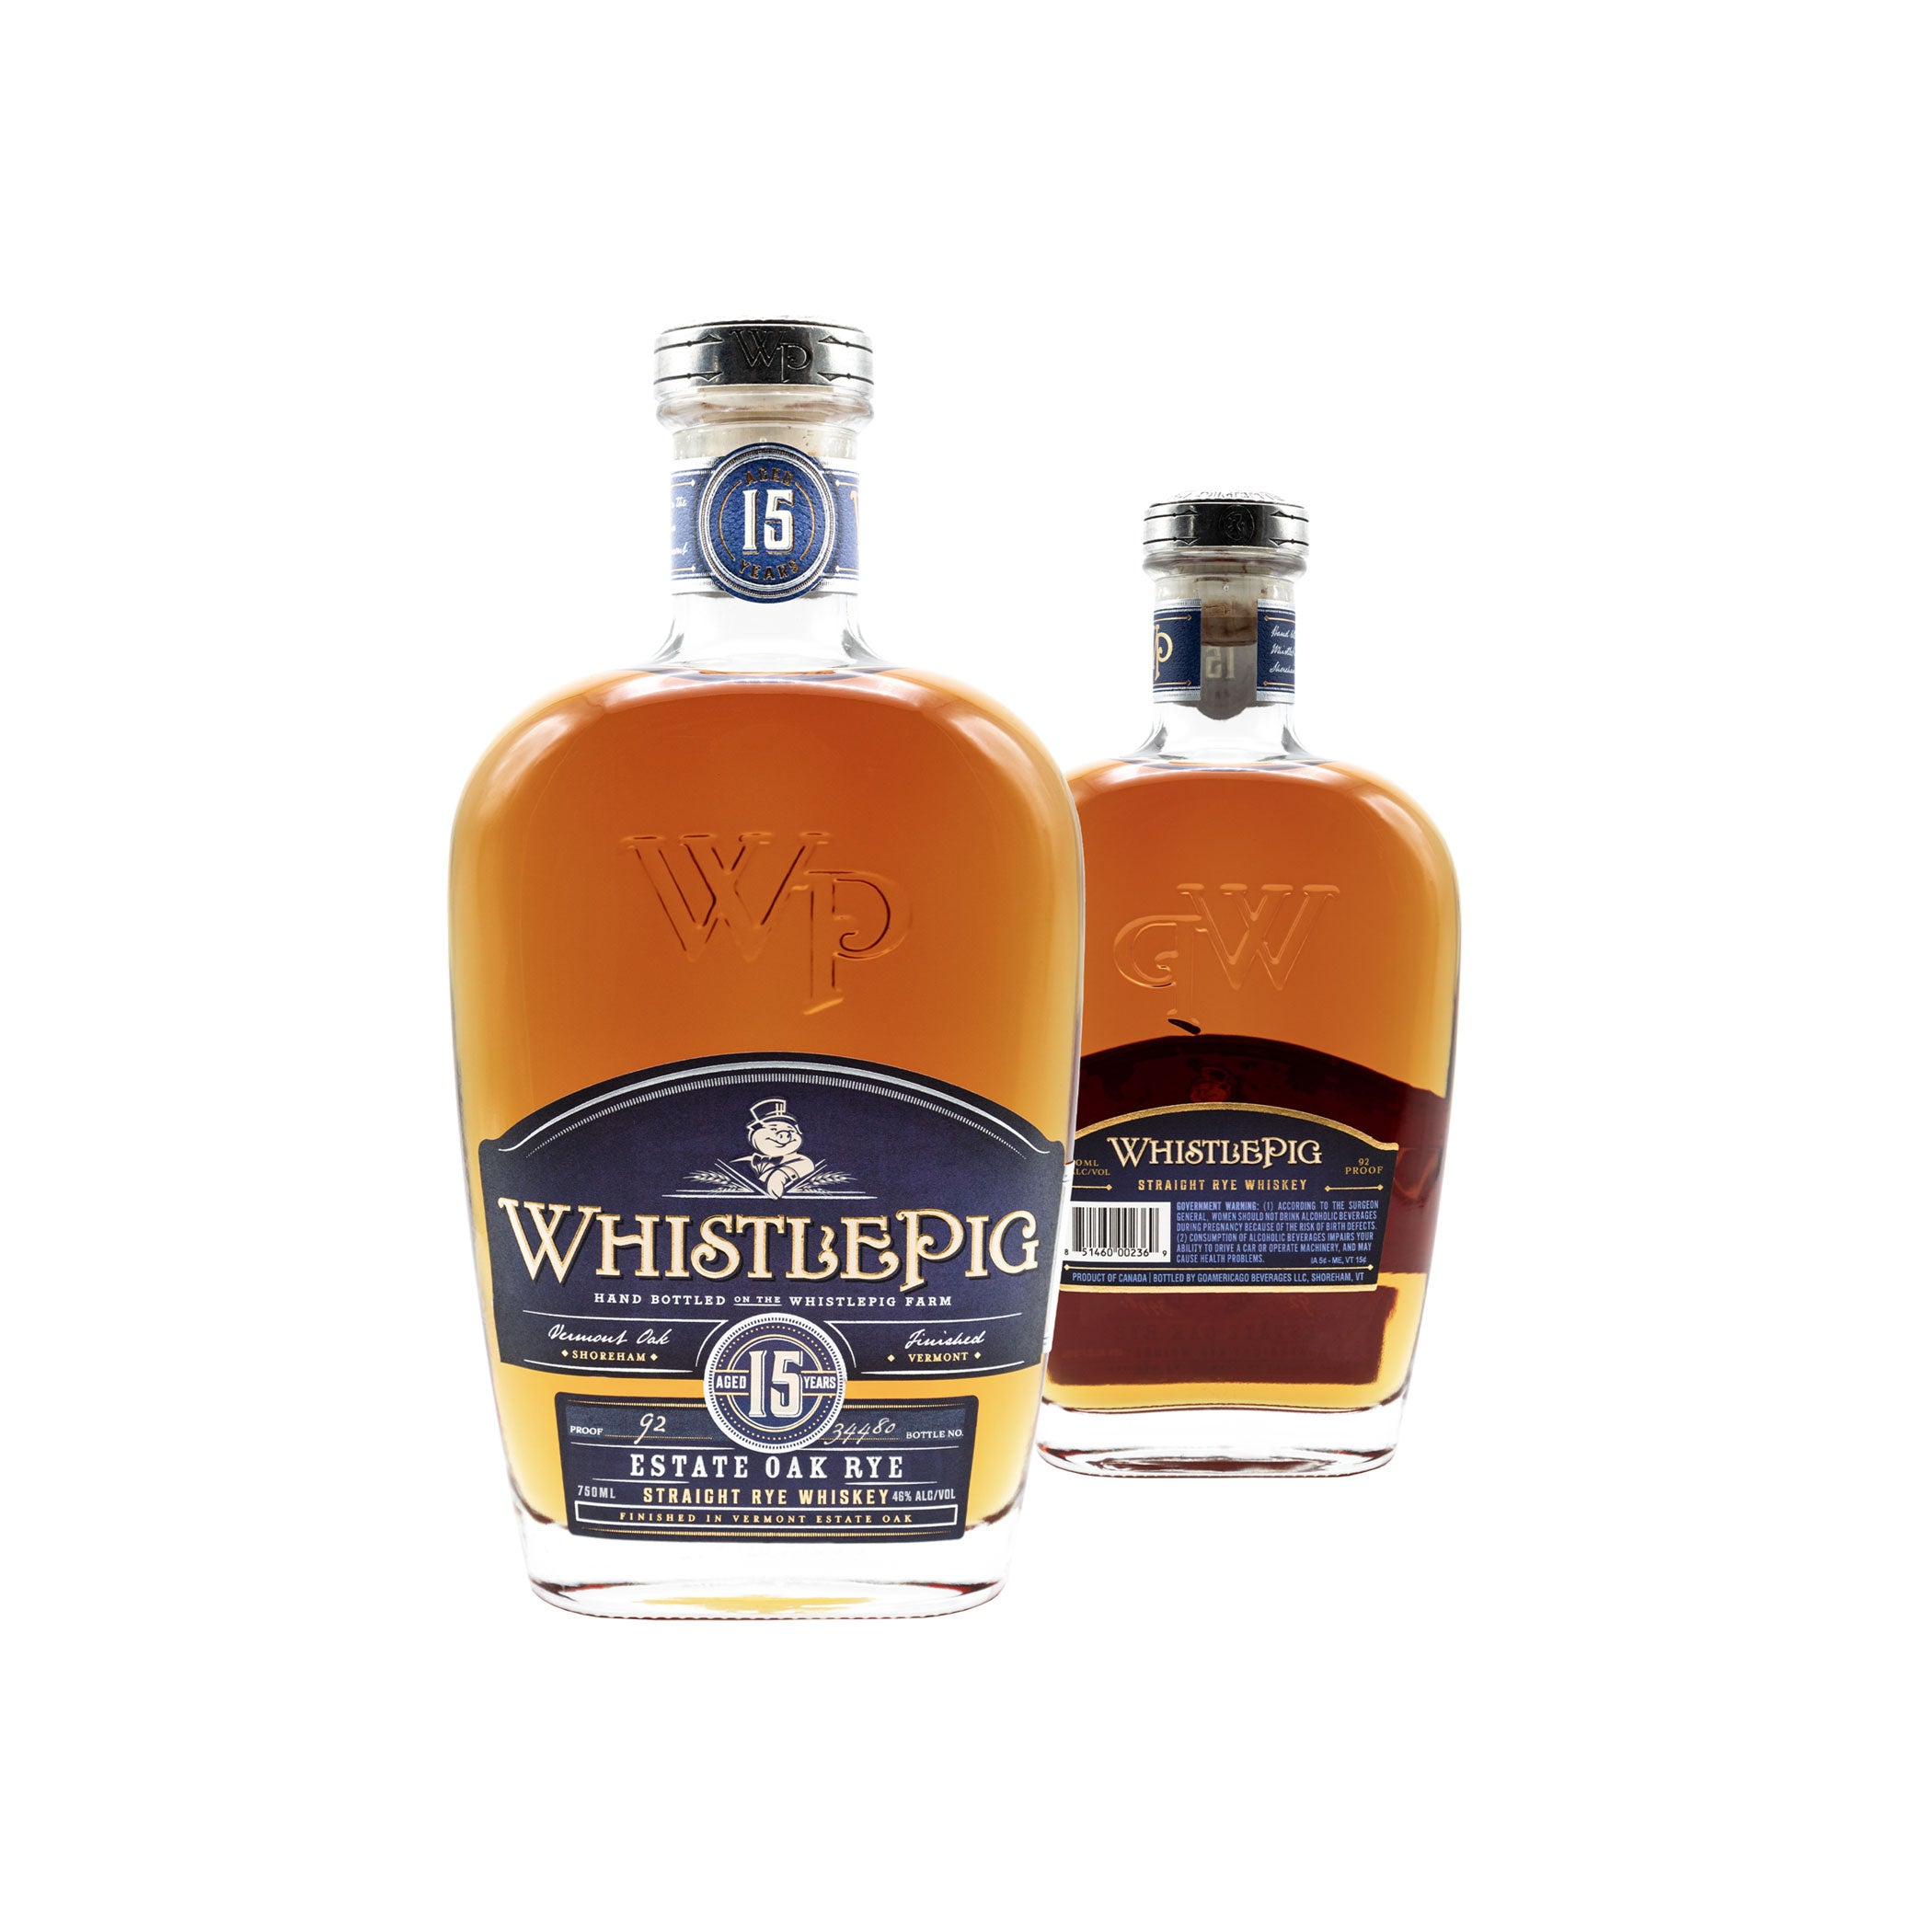 WhistlePig 15 Year Old - Straight Rye